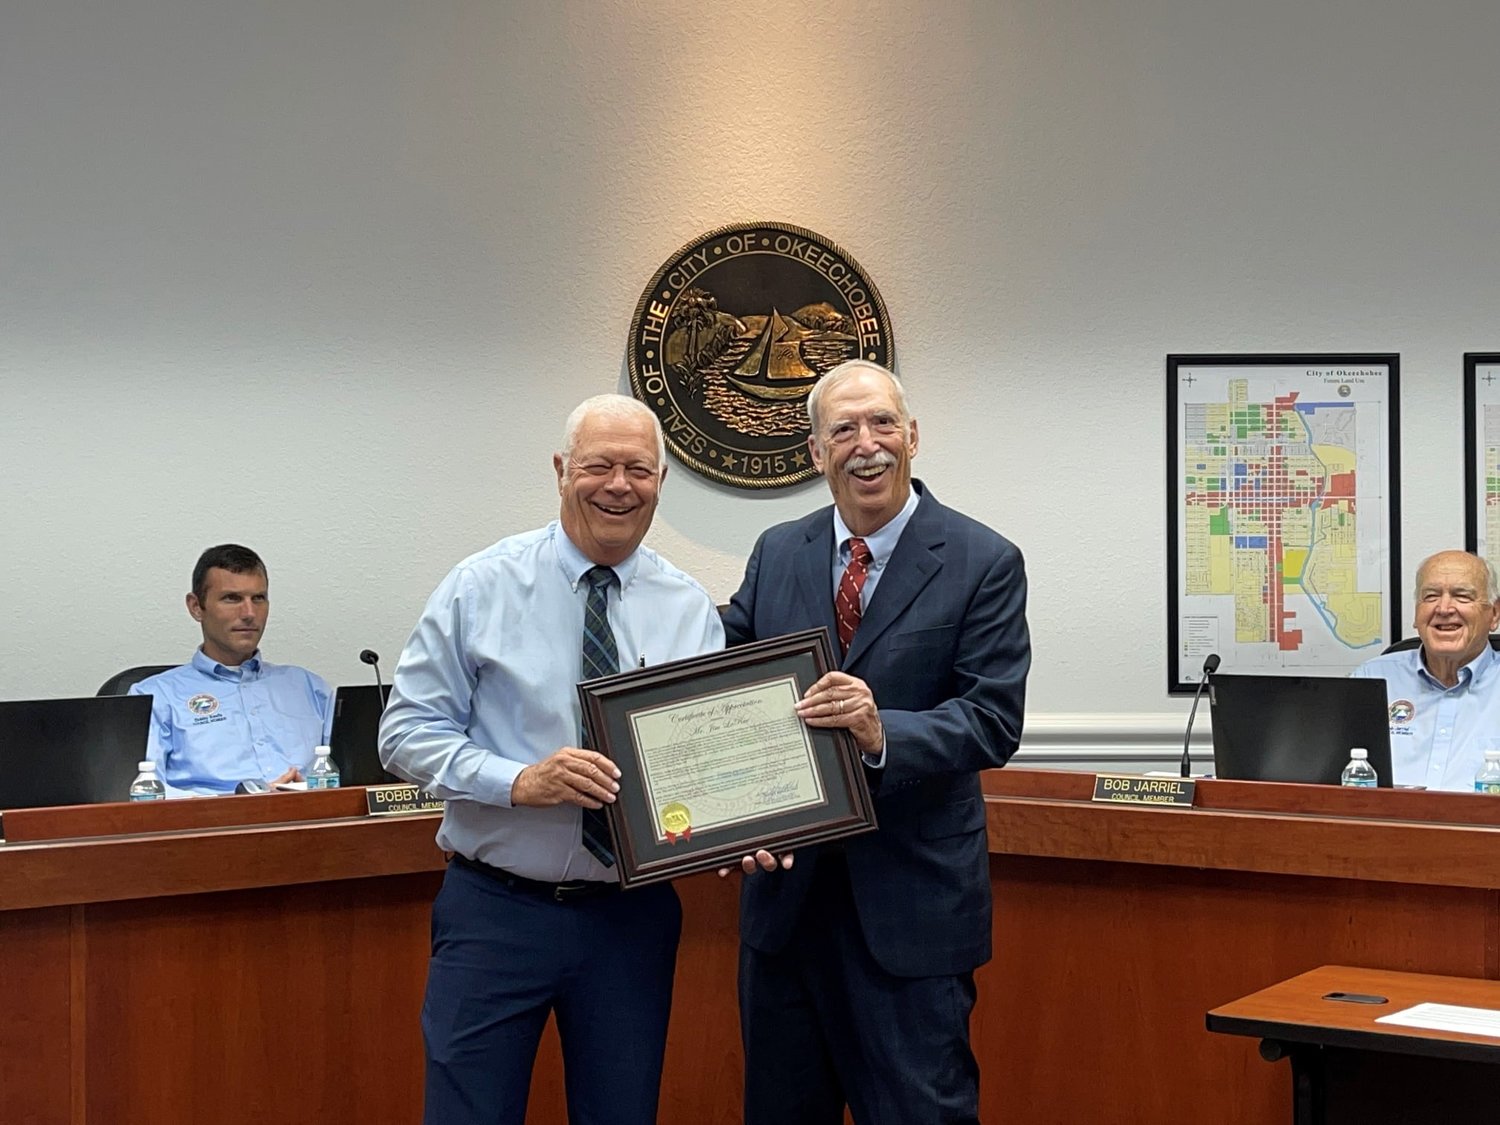 Jim LaRue (right) is presented with a certificate of appreciation for his many years of service to the city.